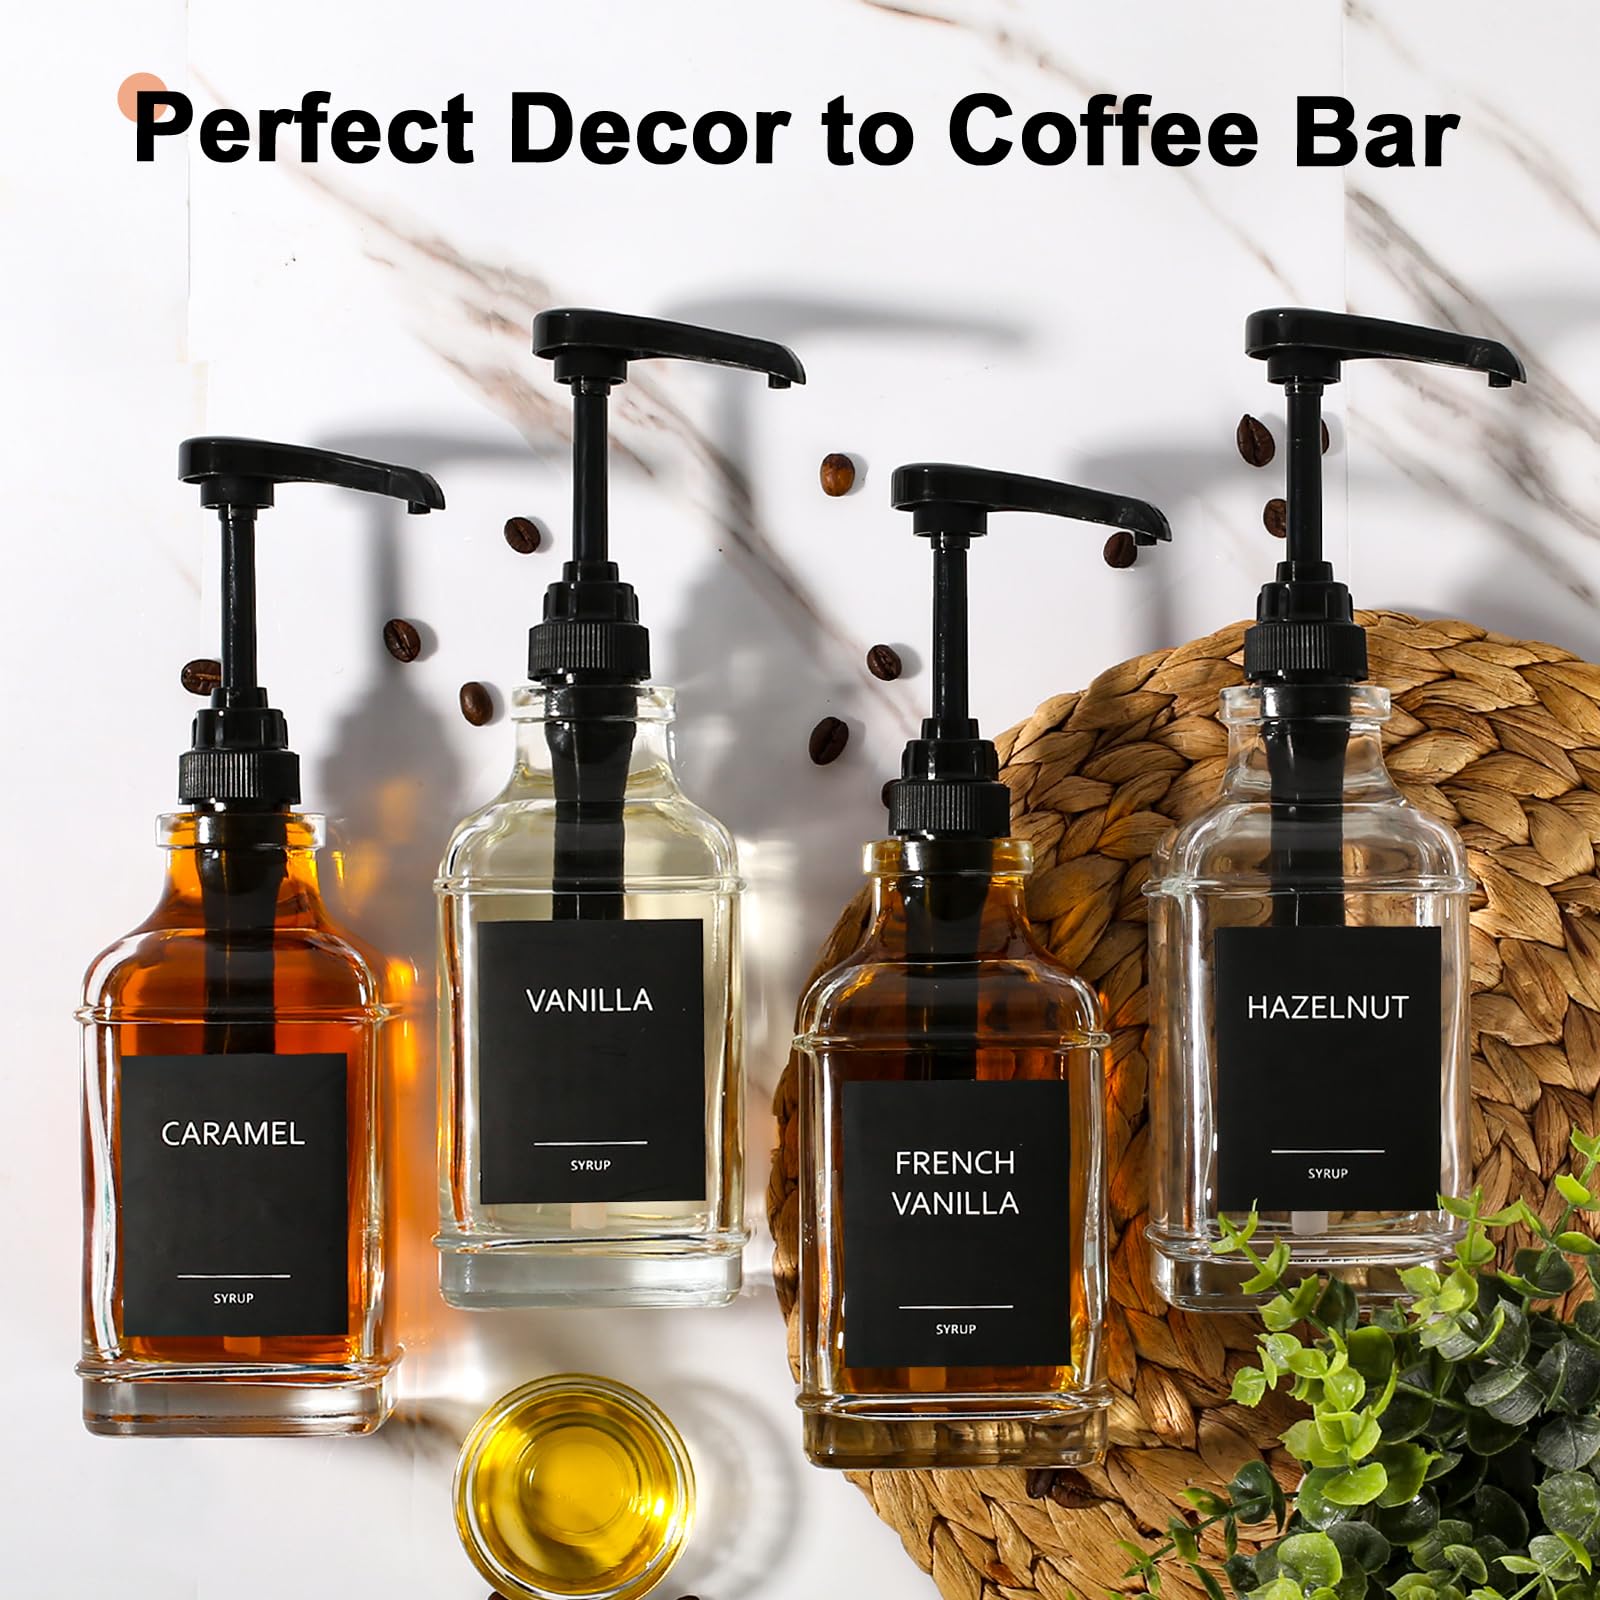 GMISUN Coffee Syrup Dispenser for Coffee Bar, Square Glass Syrup Dispenser with 1/4oz Large Capacity Pump, Coffee Syrup Pump Dispenser, Coffee Bar Accessories, Organizer, Decor, Black, 16oz, 4 Pack